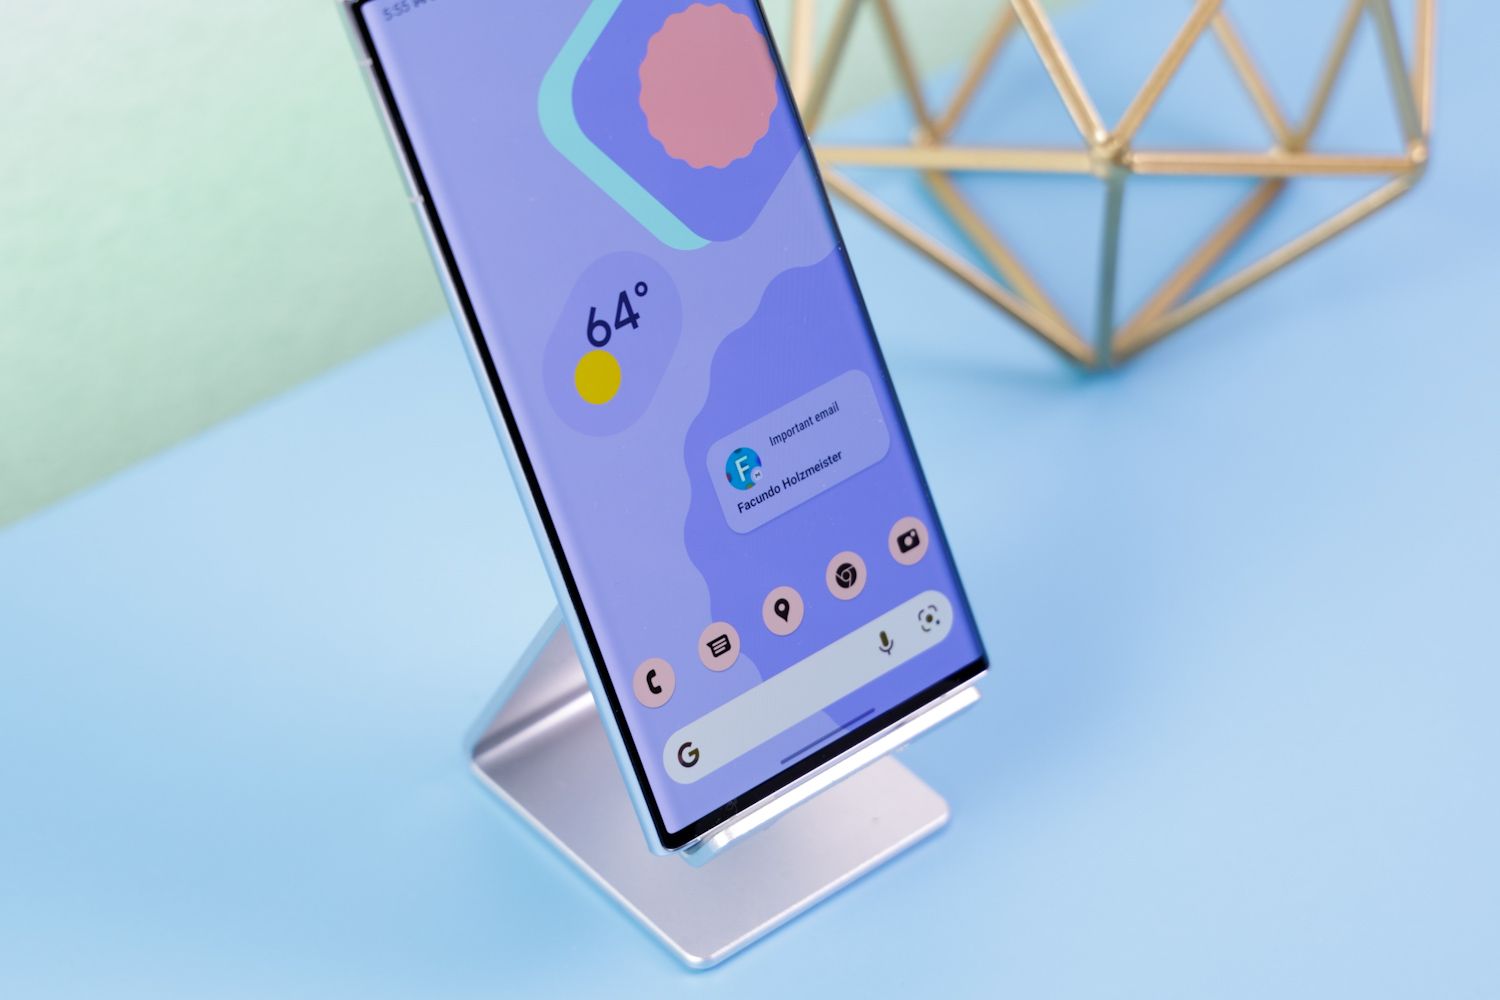 The conversations widget on an Android phone with a phone stand